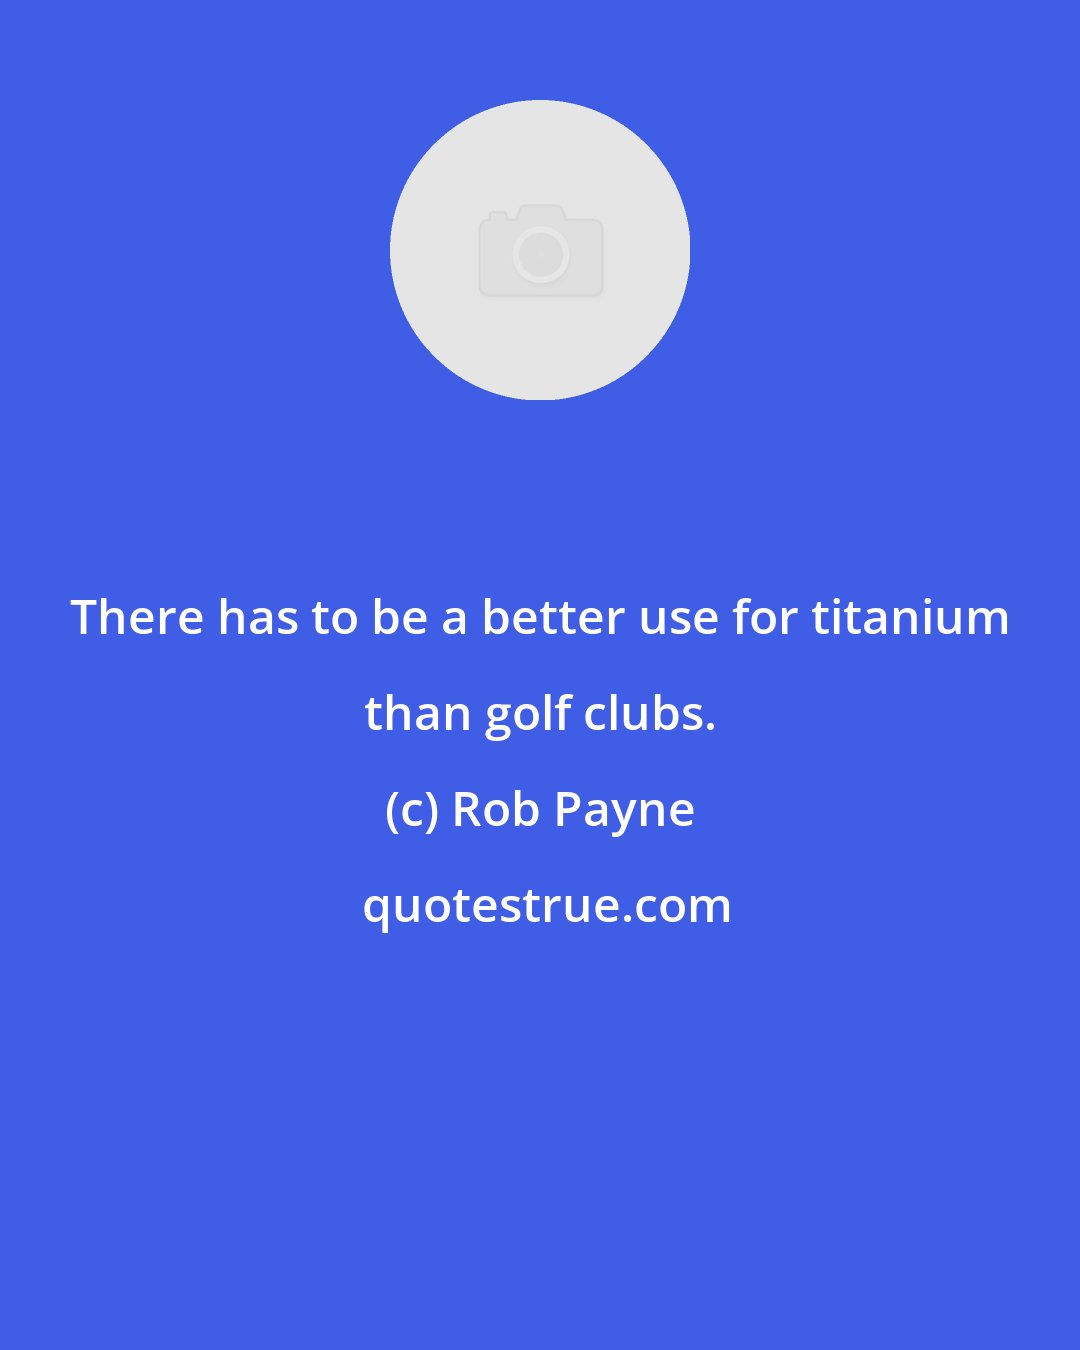 Rob Payne: There has to be a better use for titanium than golf clubs.